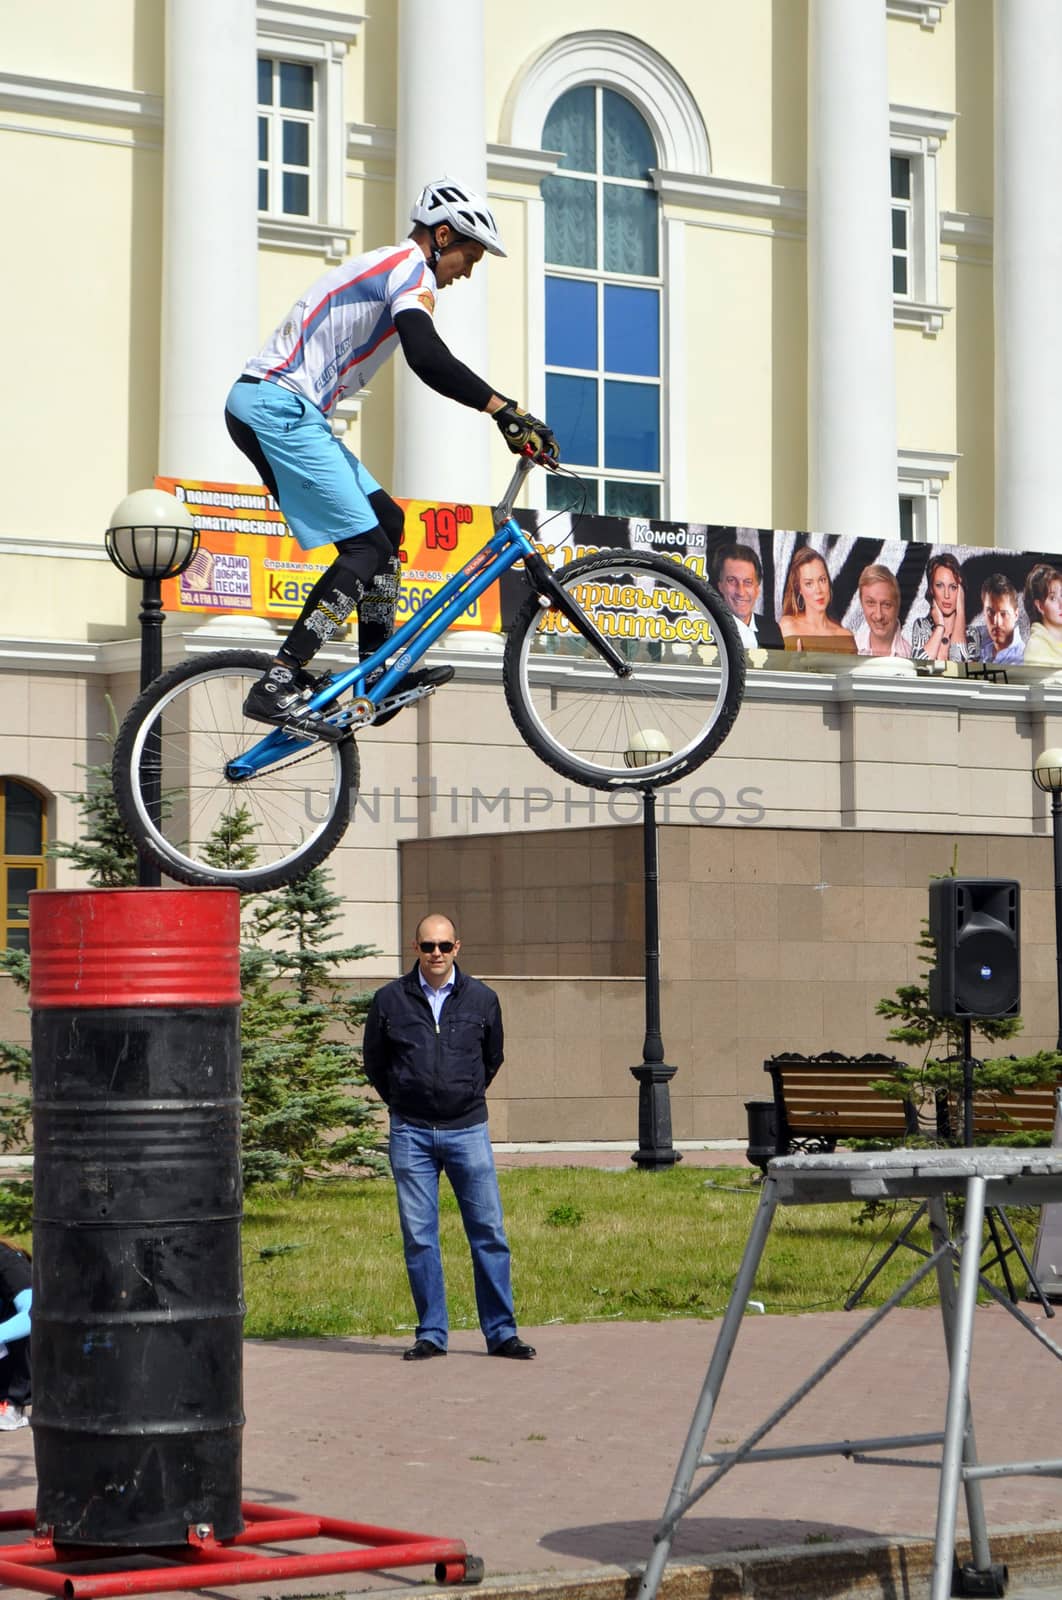 Mikhail Sukhanov – the champion of Russia on a cycle trial, acts in Tyumen on a holiday the City Day 26.07.2014г. by veronka72